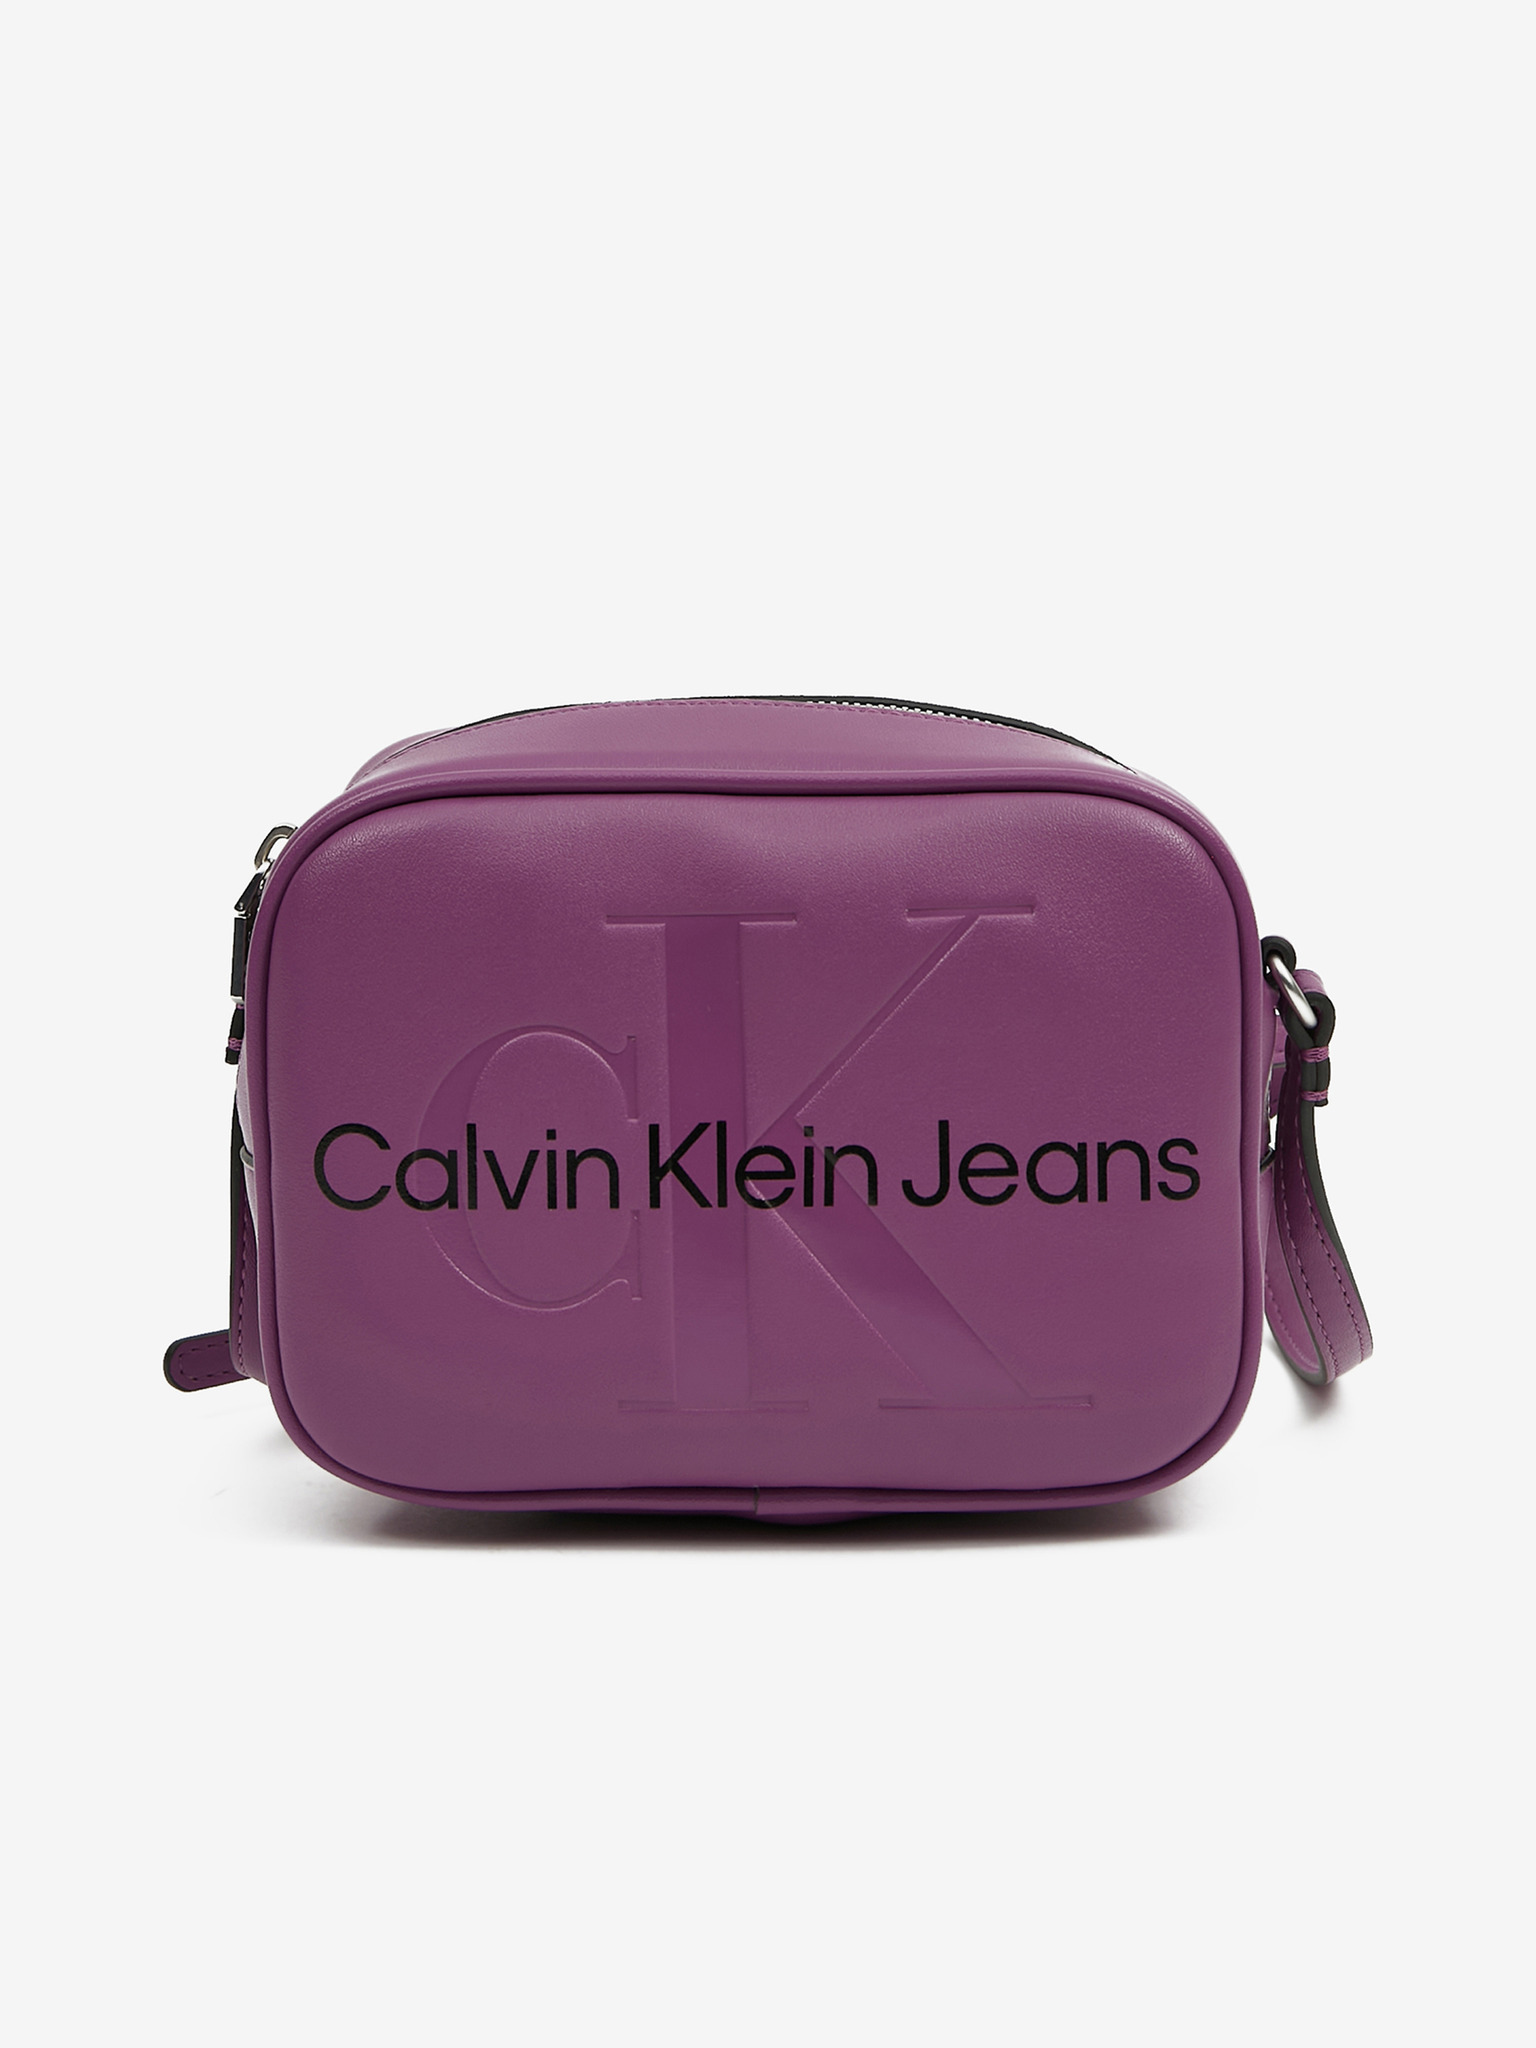 Calvin Klein Jeans cotton monogram logo sculpted camera bag in red - RED